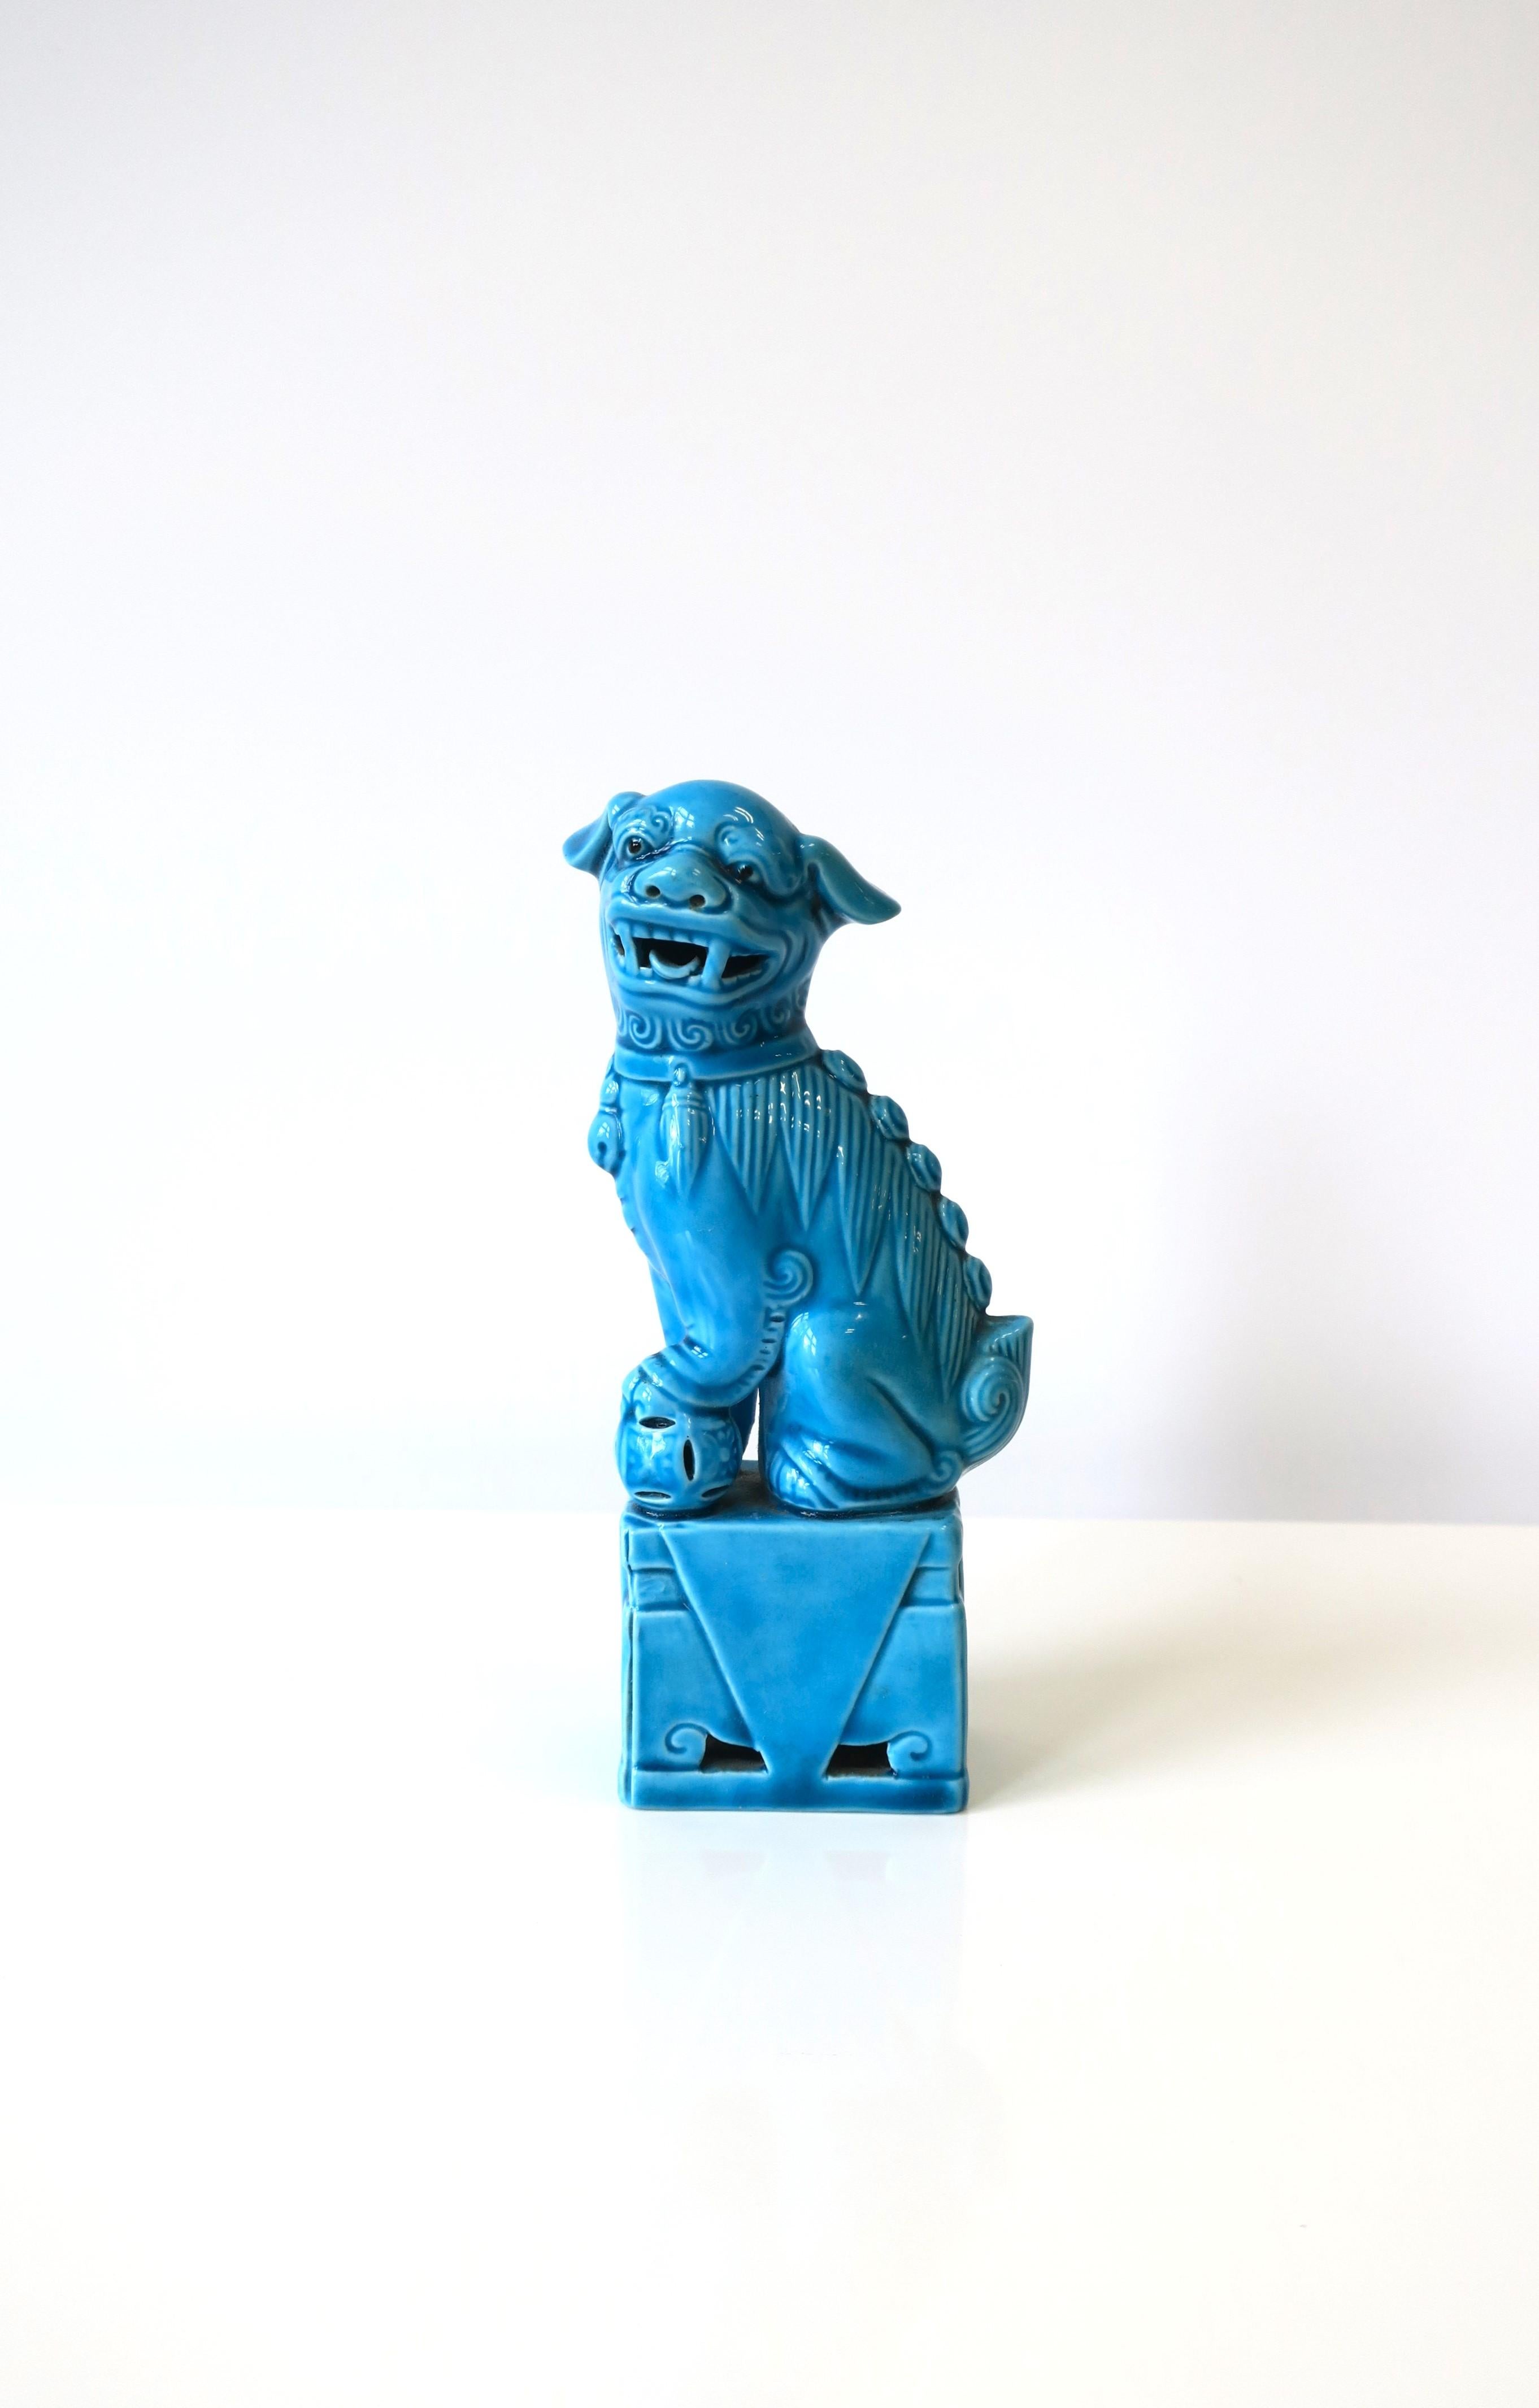 A single Lion Foo dog ceramic decorative object, circa mid-20th century, 1960s, China. This Lion Foo Dog is a beautiful turquoise blue and makes a great statement piece / decorative object for a desk, shelf, library, cocktail table, etc. Dimensions: